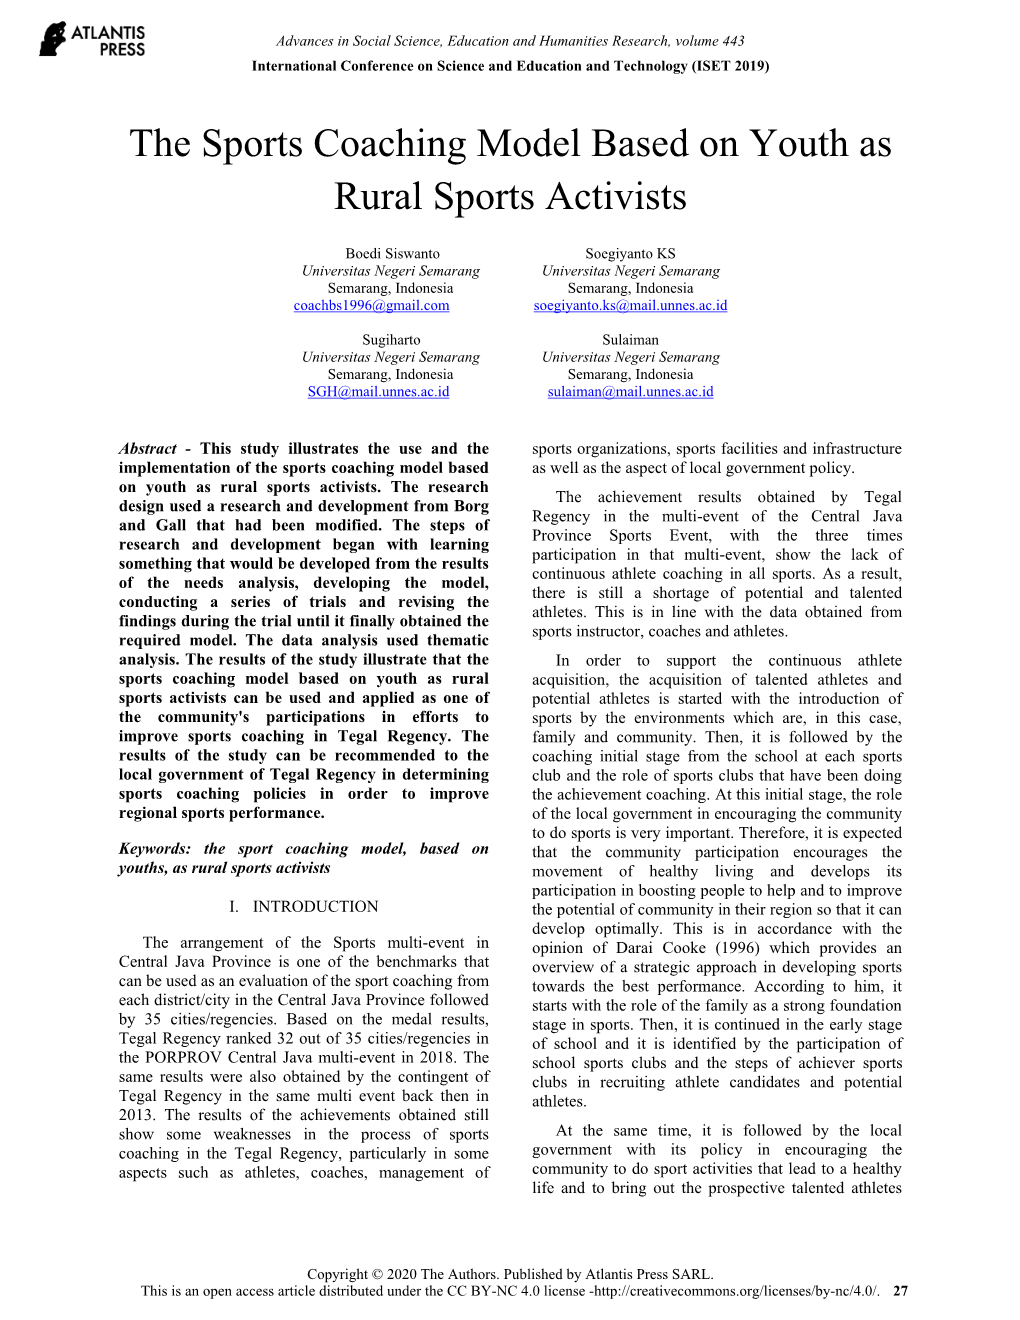 The Sports Coaching Model Based on Youth As Rural Sports Activists